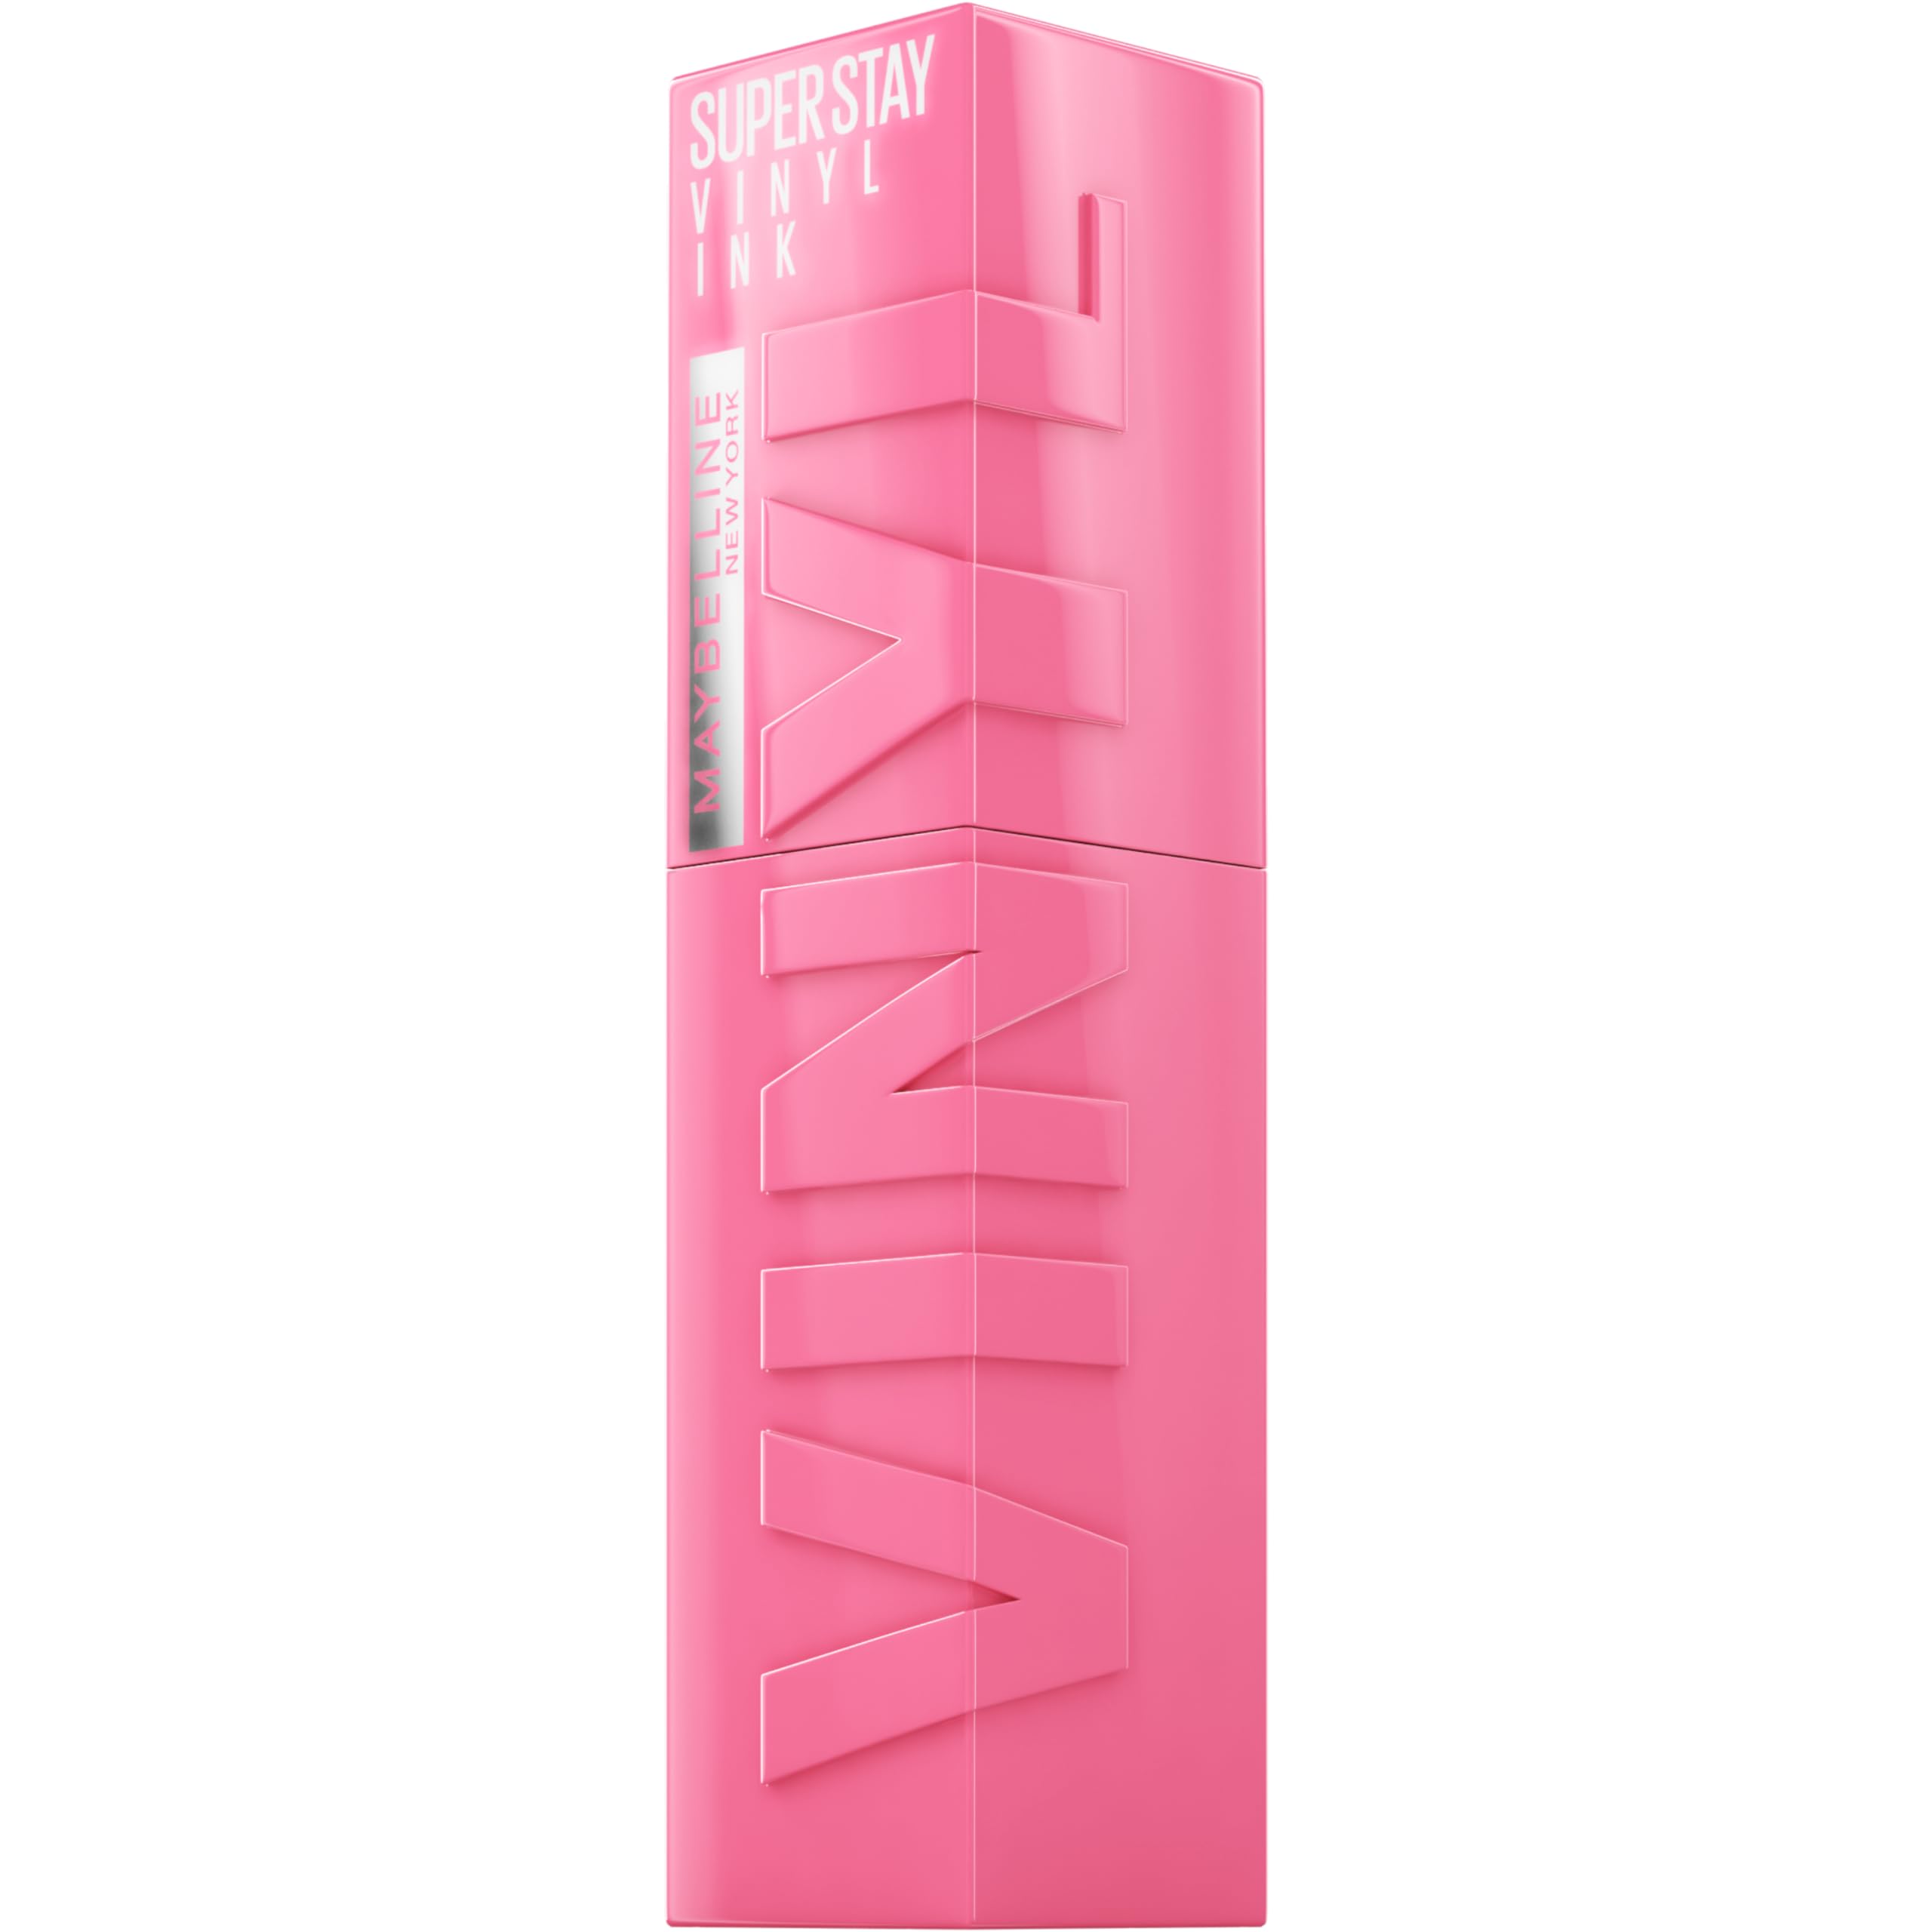 MAYBELLINE Super Stay Vinyl Ink Longwear No-Budge Liquid Lipcolor Make Up, Highly Pigmented Color and Instant Shine, Upbeat, 1 Count